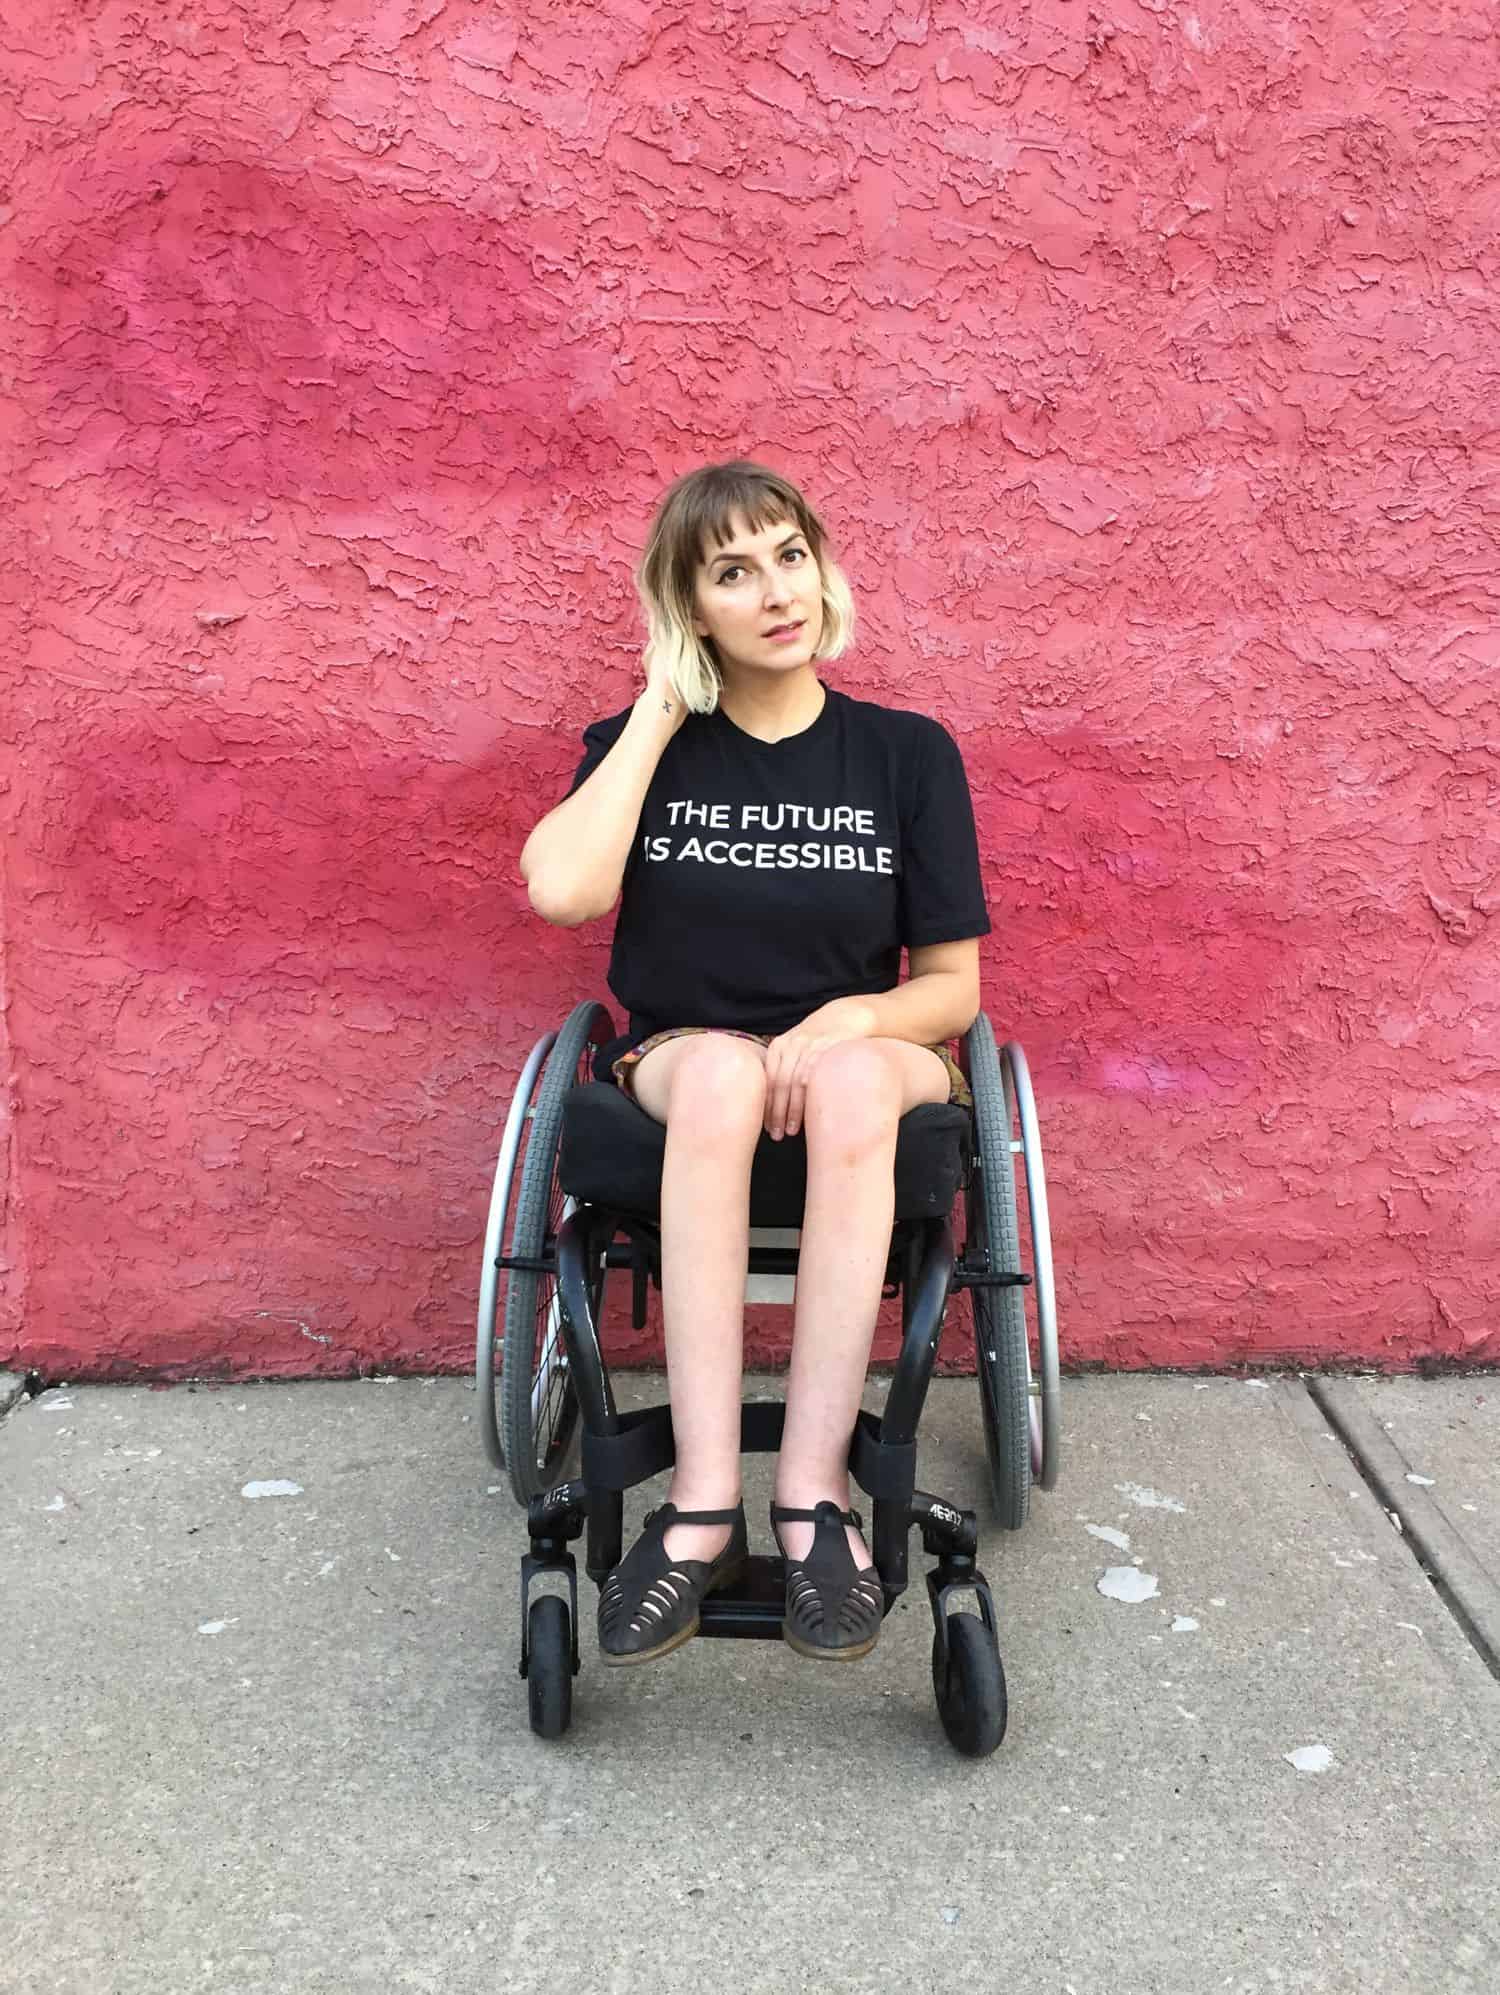 Every body deserves beautiful photographs. Meet one woman with a wheelchair whose photos prove that cameras can't discriminate.